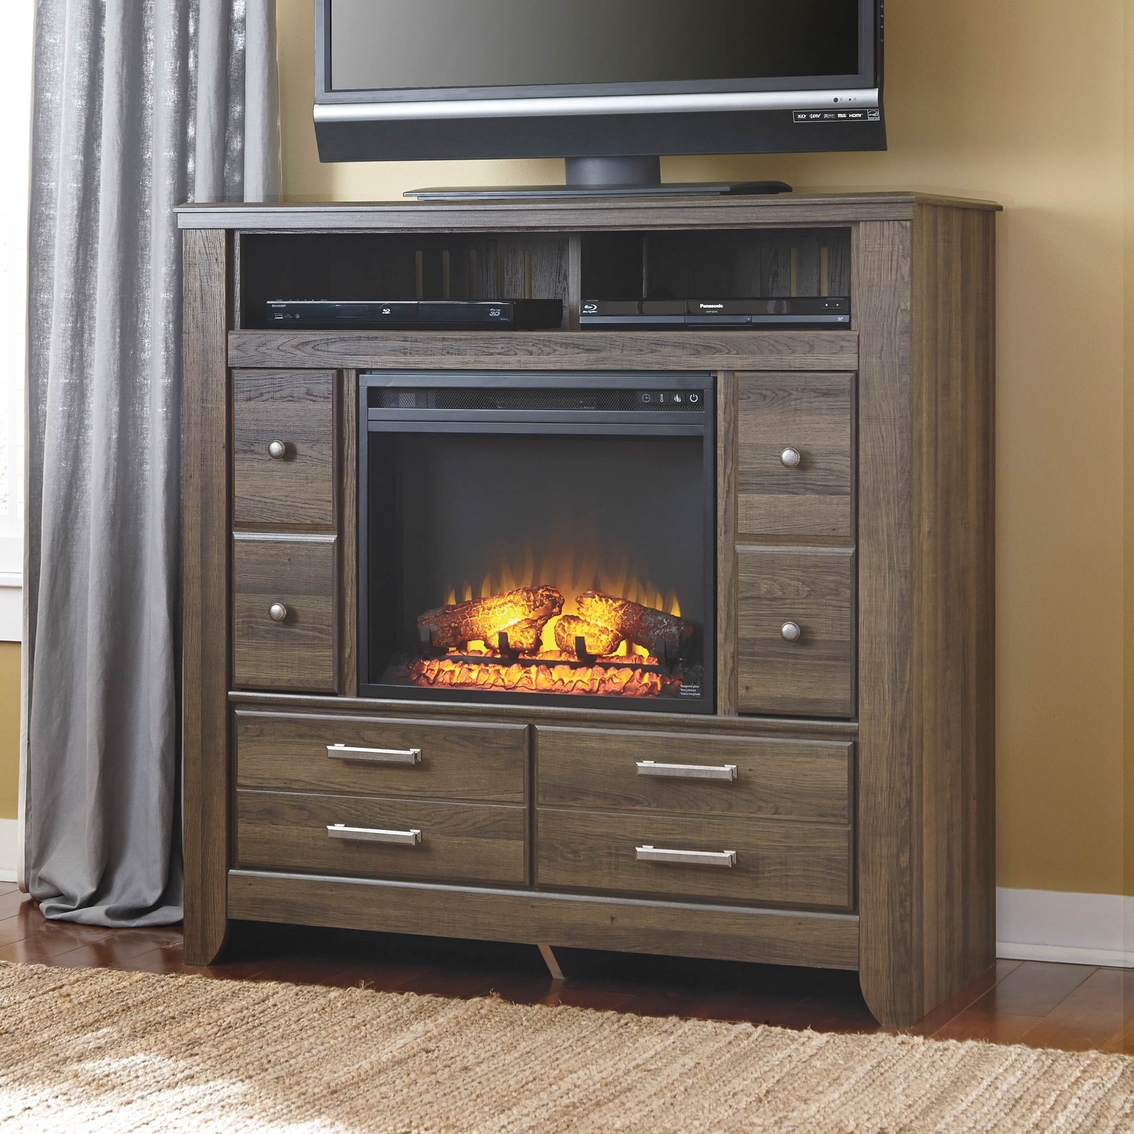 Signature Design By Ashley Juararo Media Chest With Fireplace Insert